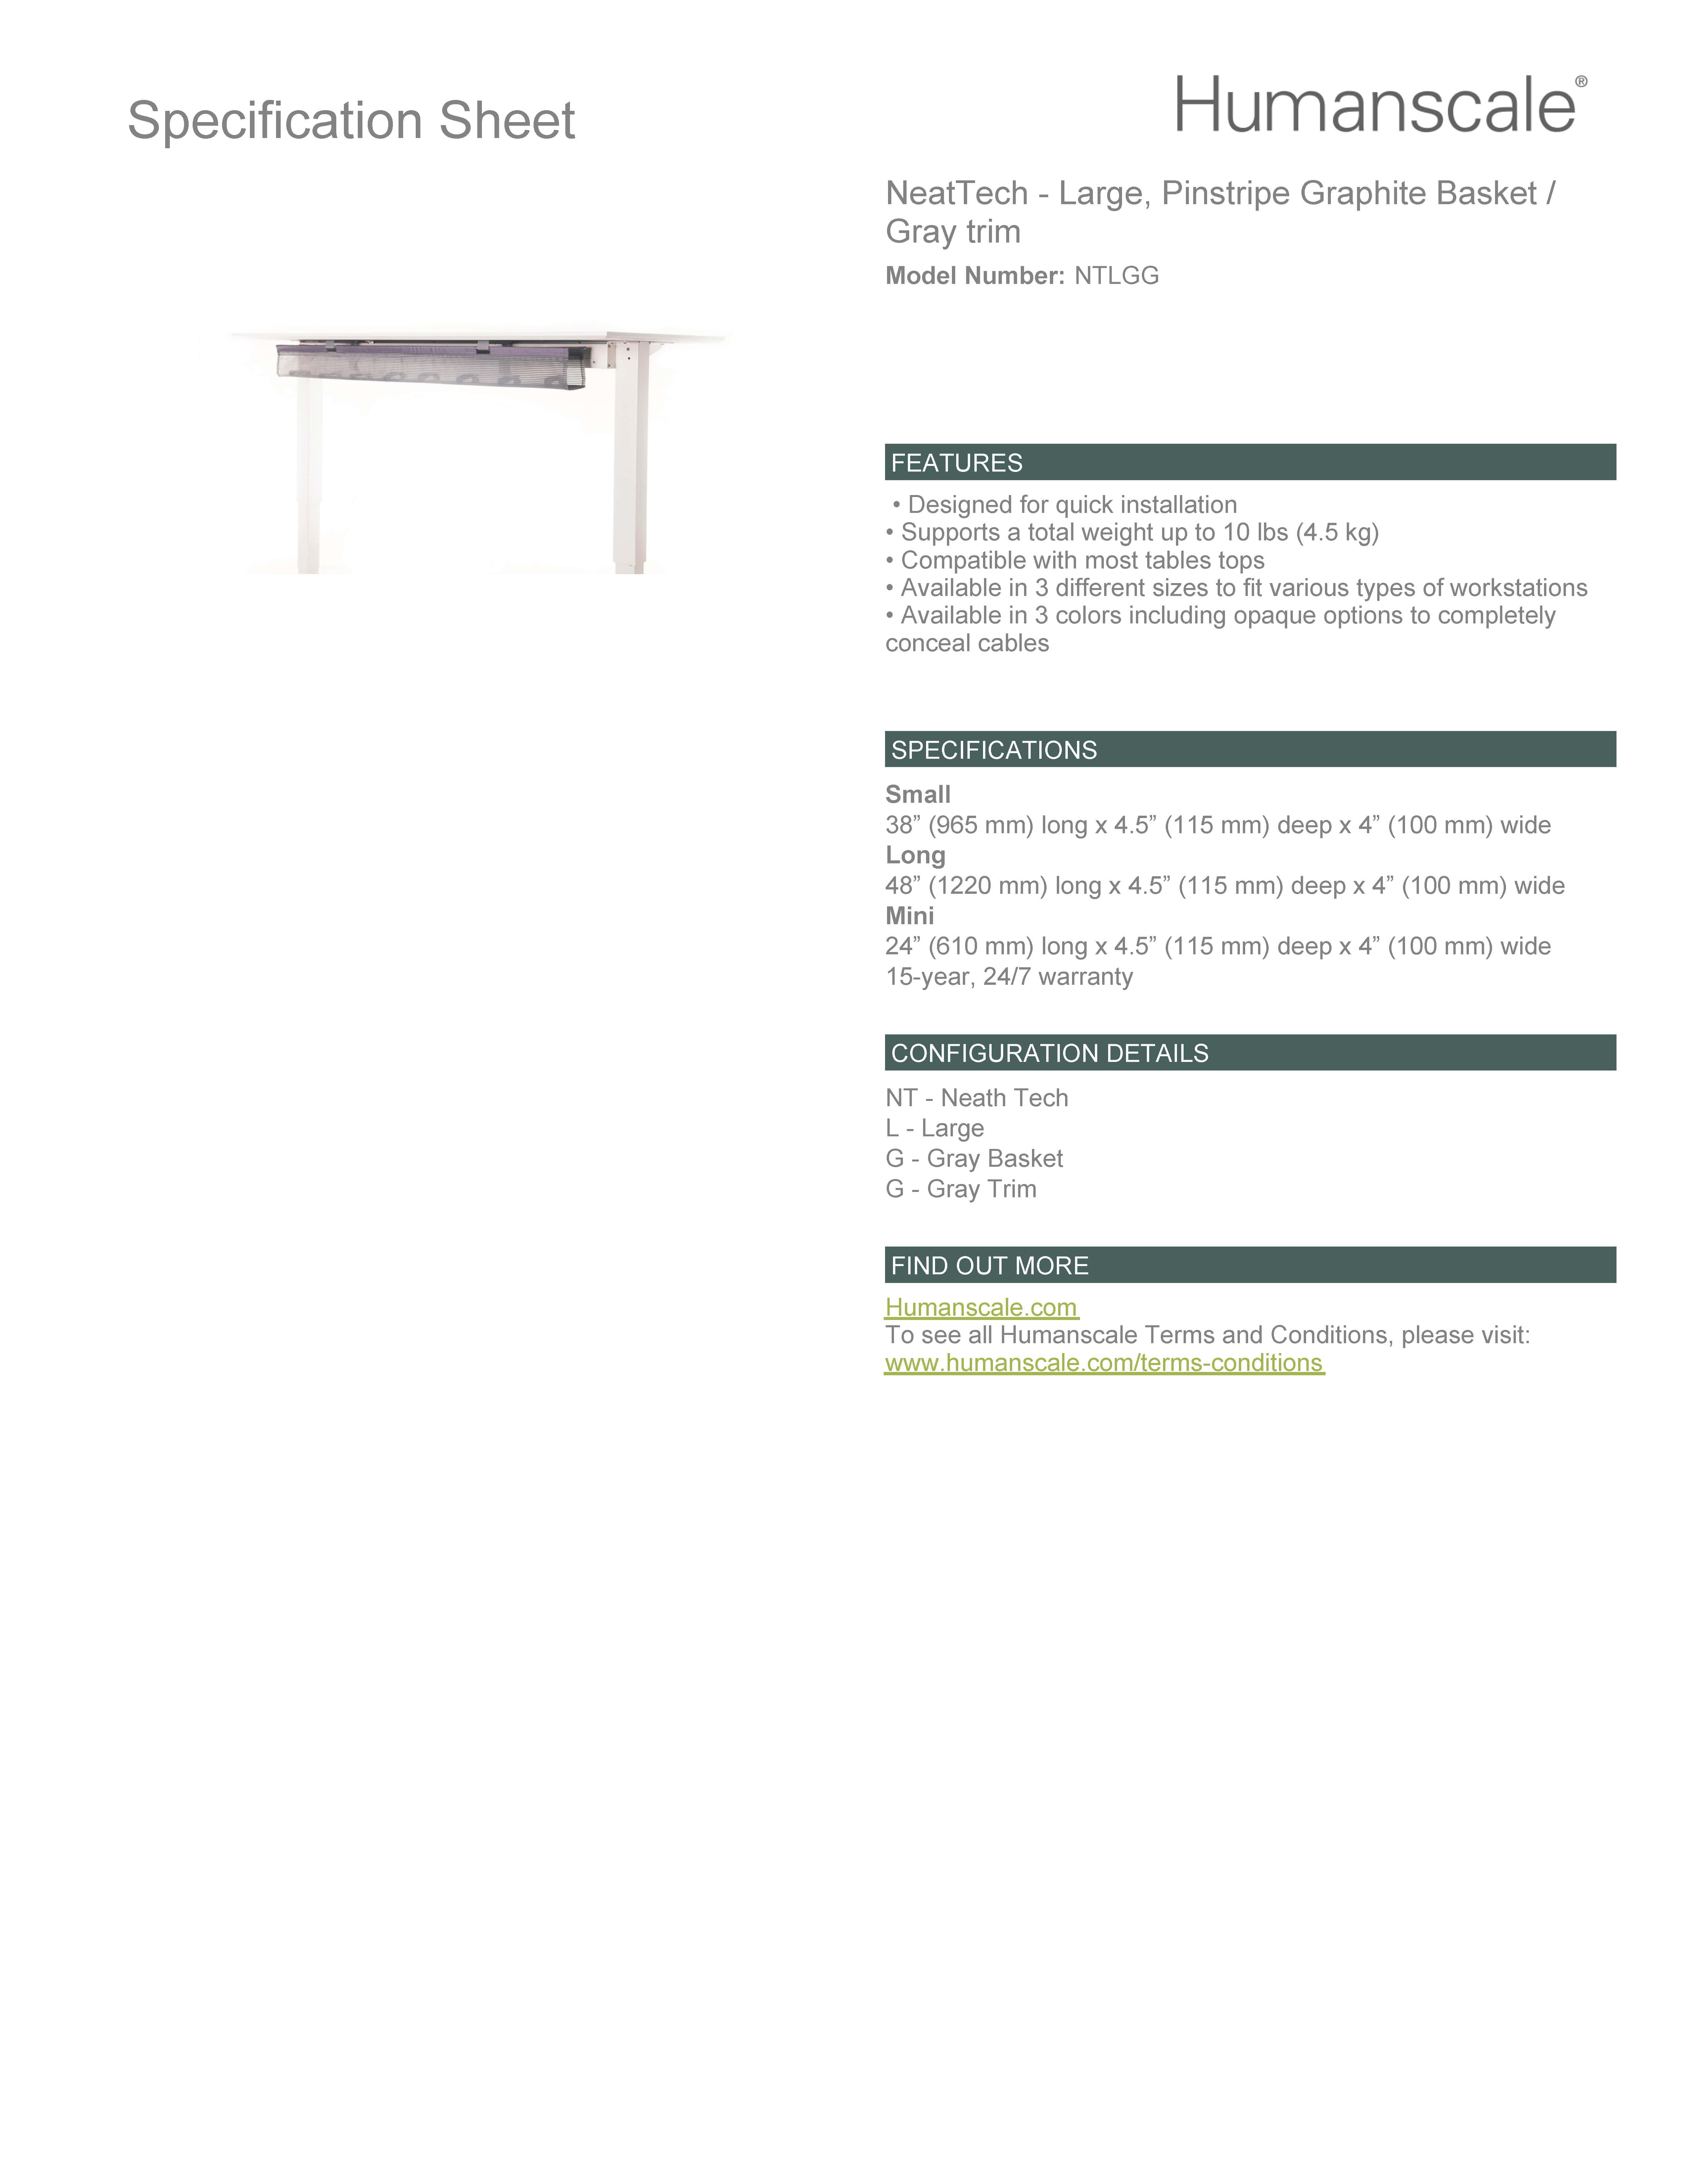 NeatTech Large Under Desk Cable Organiser - Specification Sheet